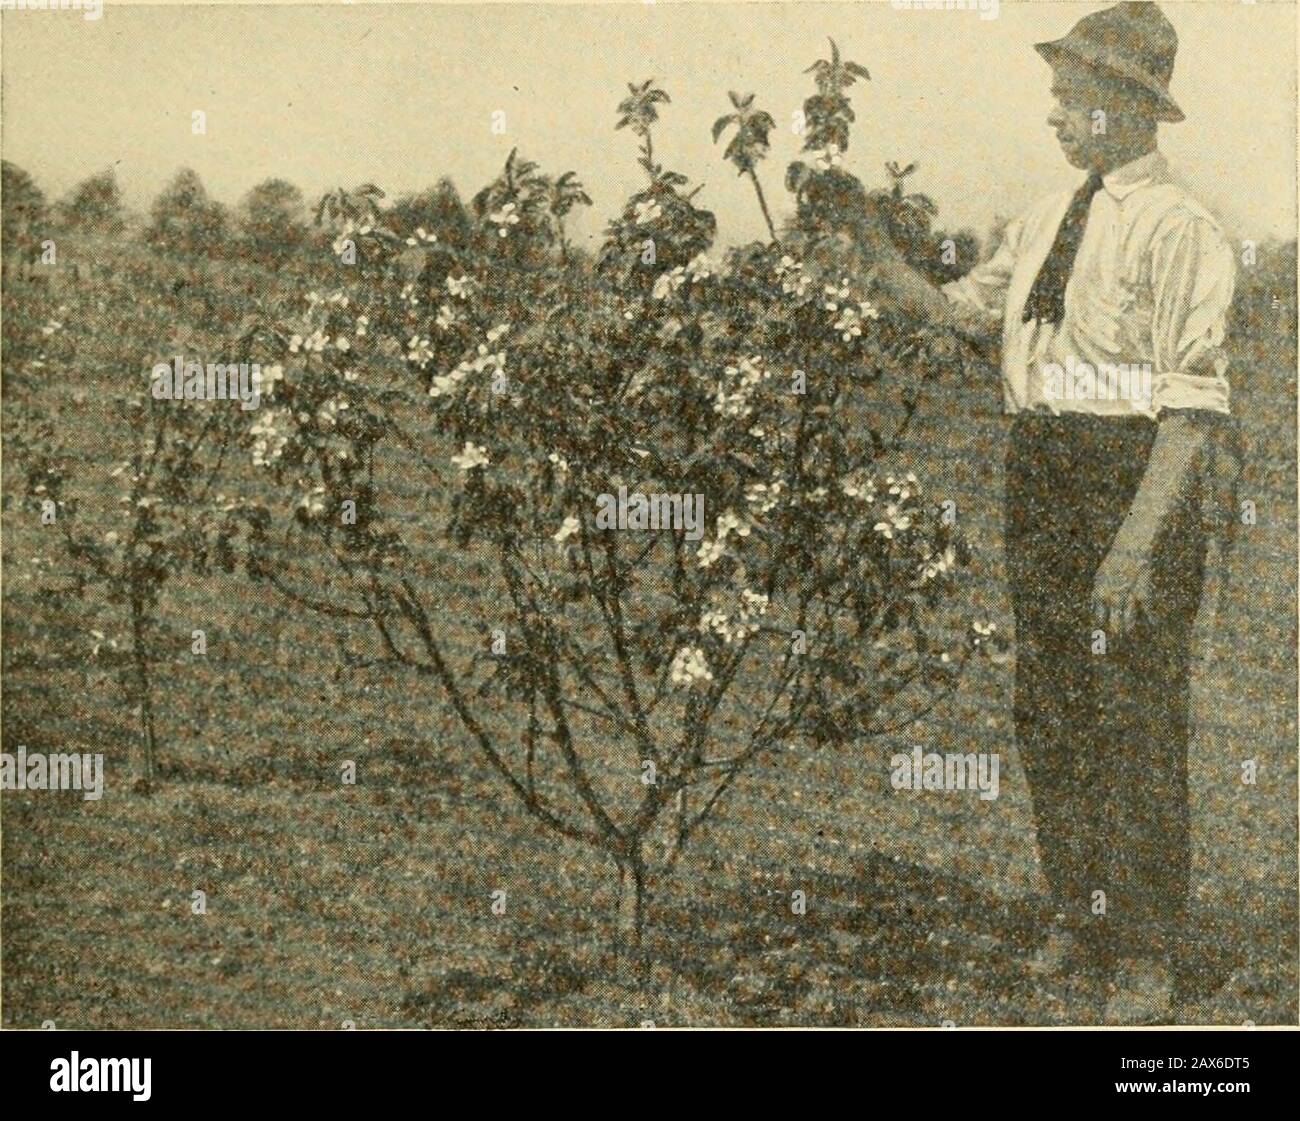 Horticulture, a text book for high schools and normals, including plant propagation; . Fig. 107.—Gano apples, before and after thinning. It takes courage to thin fruit, but thesize is increased enough to pay. (Ohio Station, Newark.) The objects of thinning are (1) to prevent the spread of rot orother disease of the fruit; (2) to increase the size and quality of the IRRIGATION IN DRY CLIMATES 183 fruit left on the trees; (3) to induce the tree to bear a good cropannually instead of every other year; (4) to save work at harvesttime in picking and sorting low grade fruit. Dwarf apple trees are ne Stock Photo